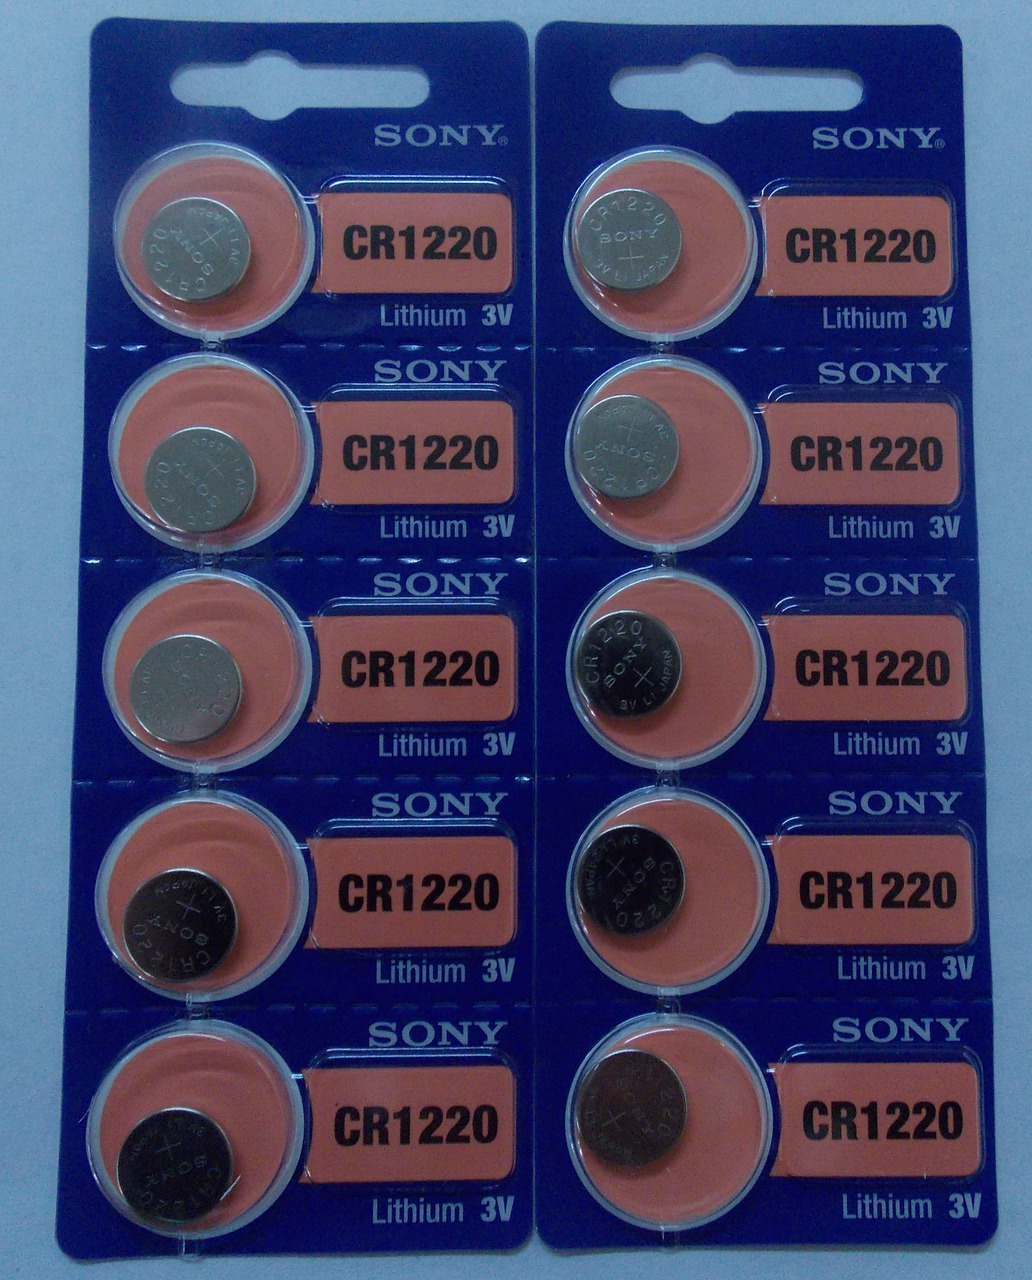 Sony CR1220 3V Lithium Coin Battery - 10 Pack + FREE SHIPPING!